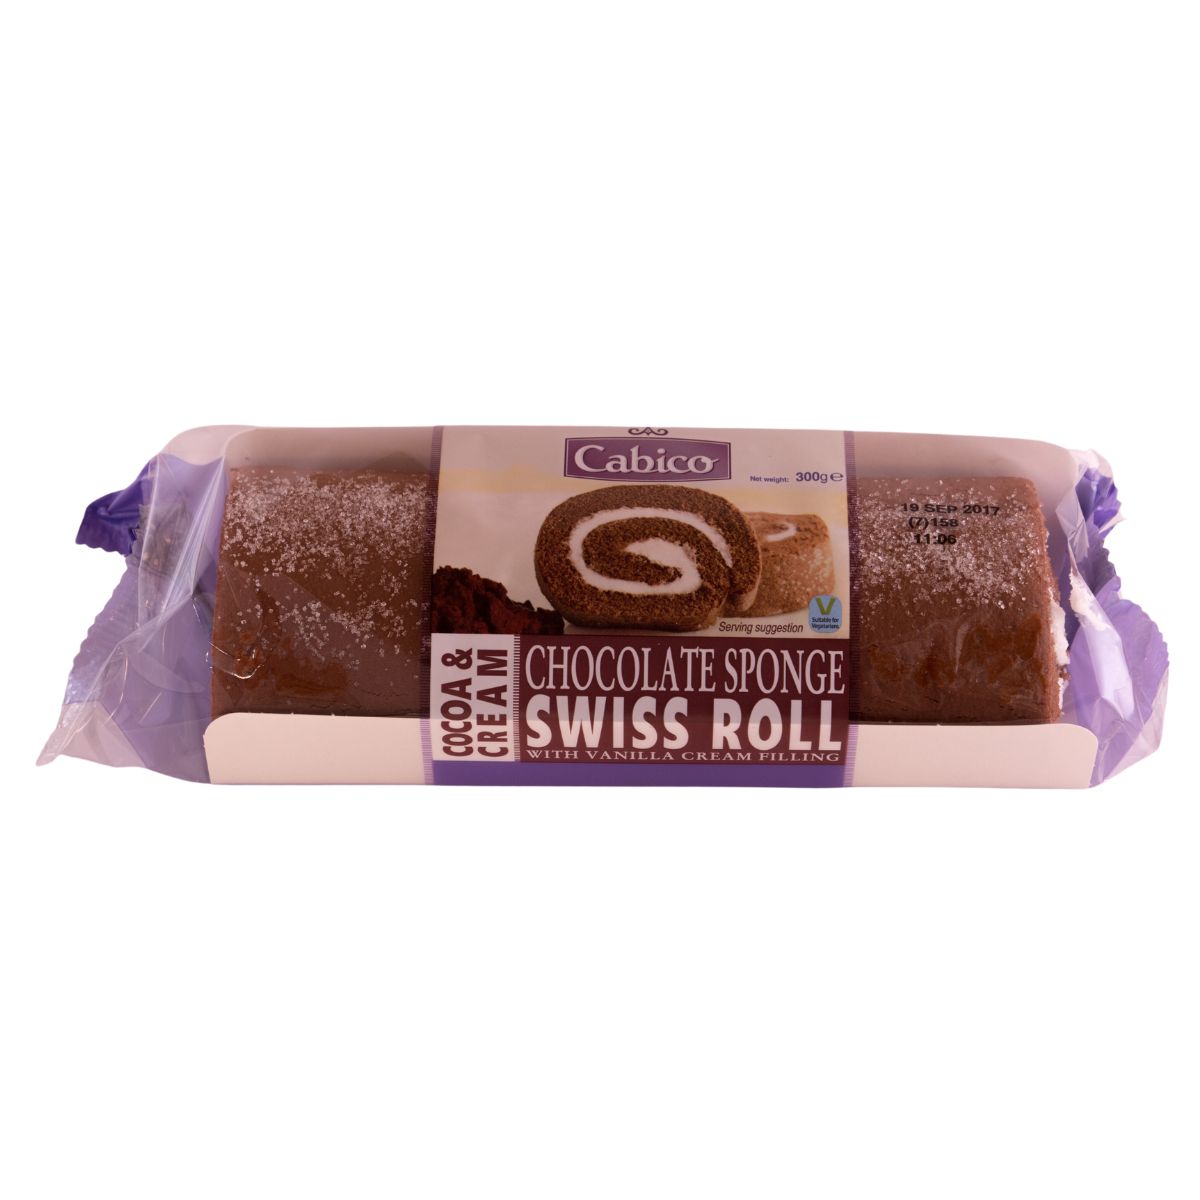 A Cabico - Chocoolate Sponge Swiss Roll - 300g on a white background.